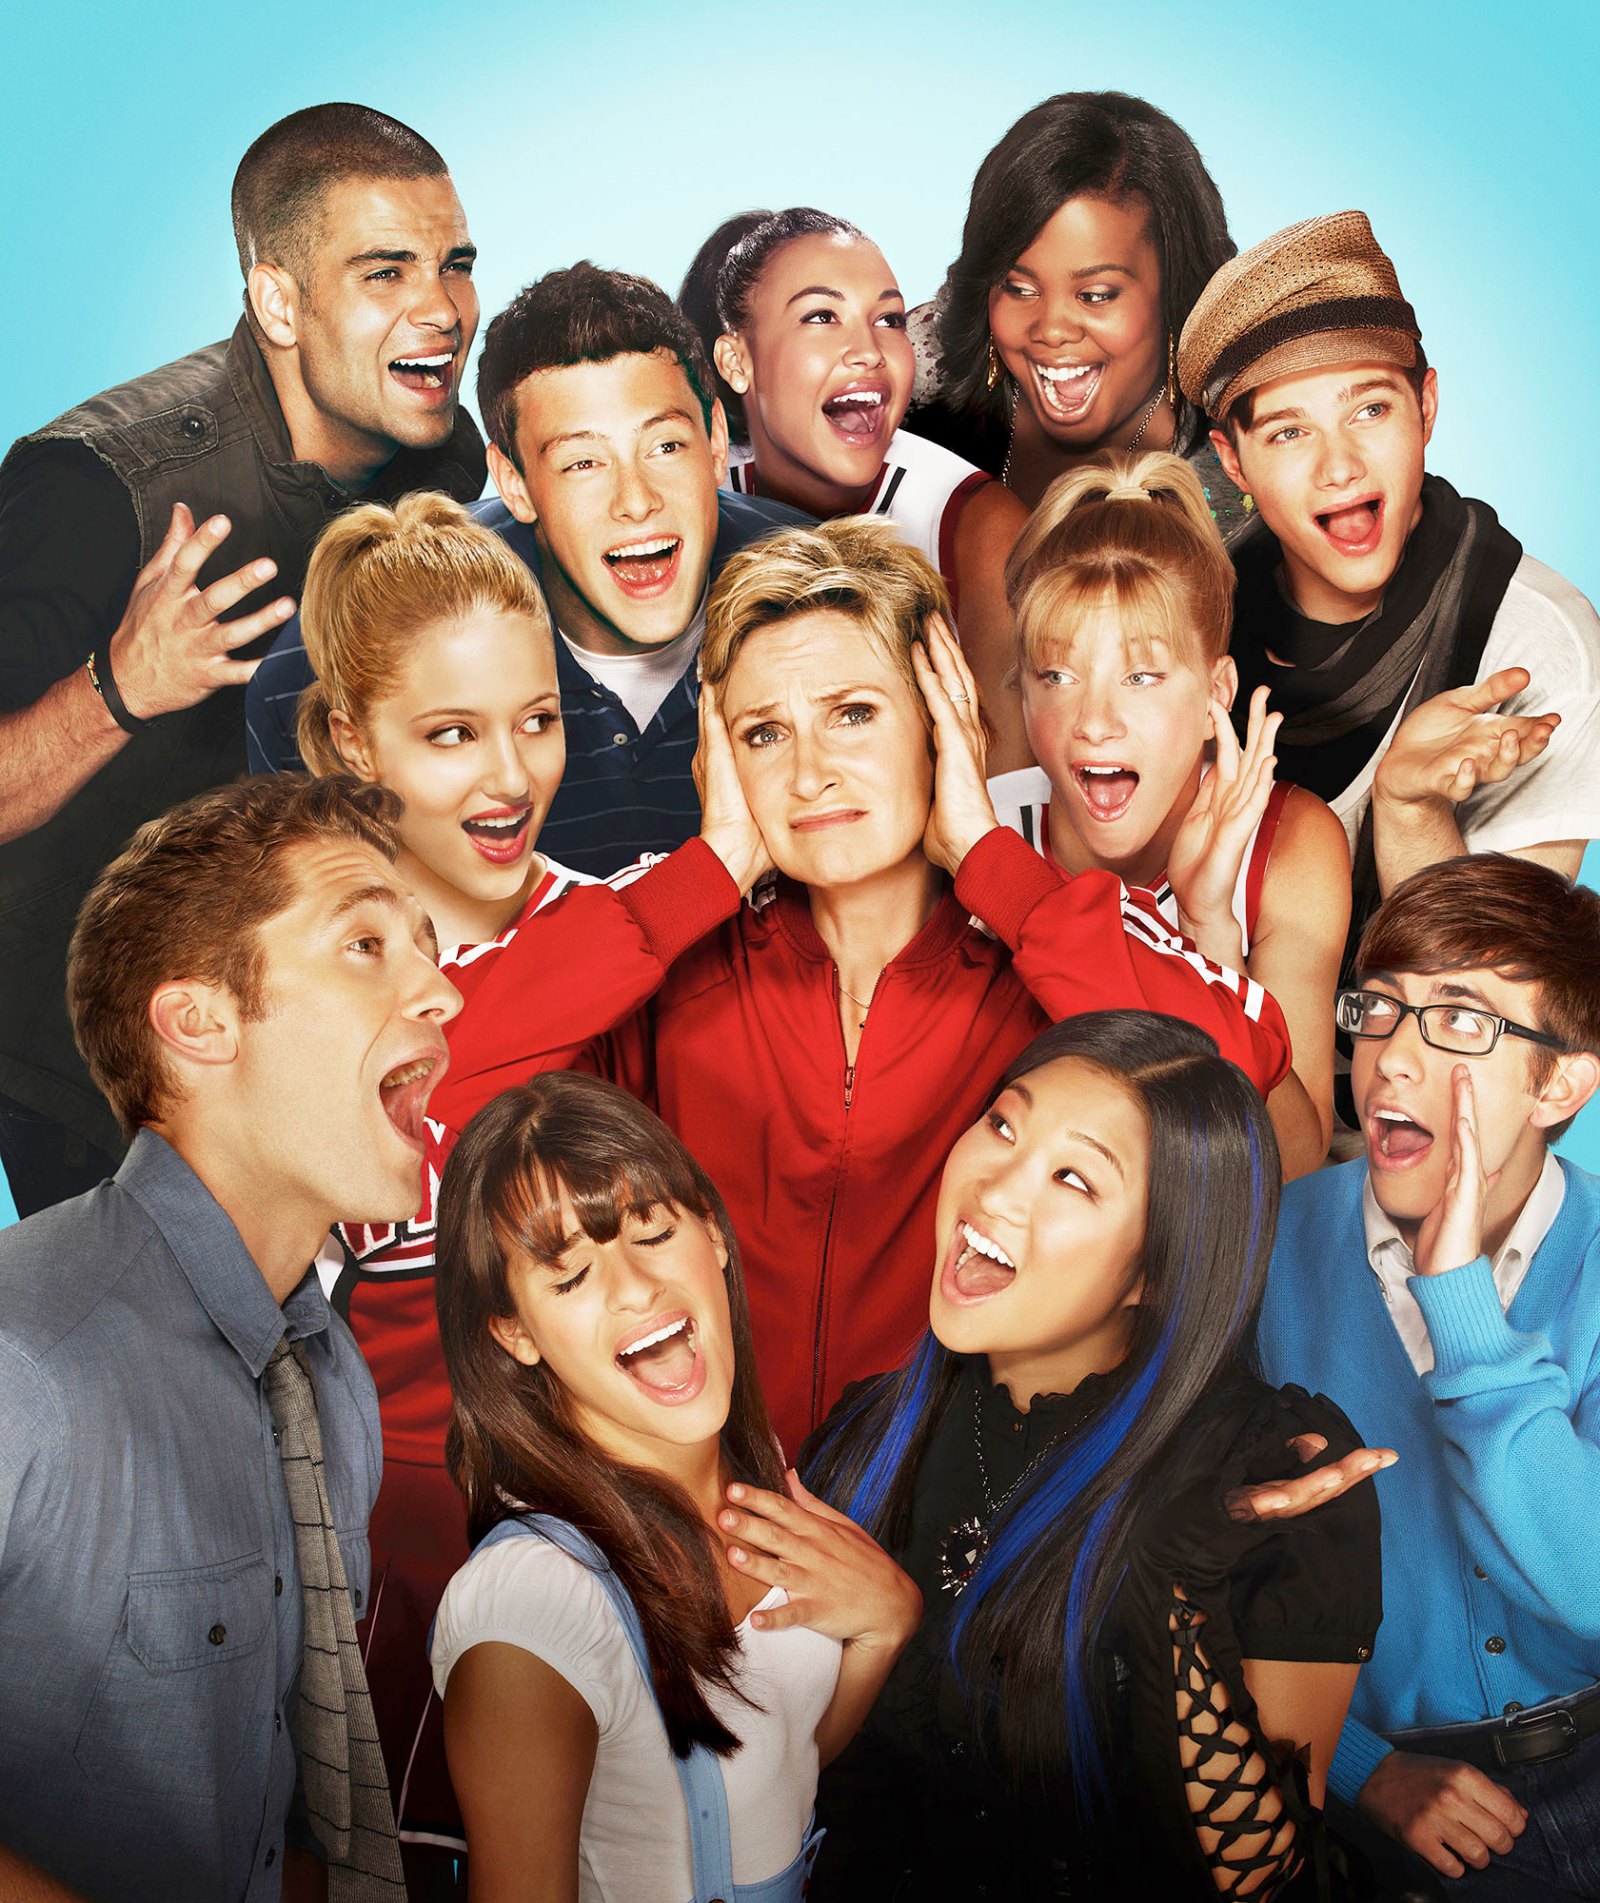 The Cast of Glee